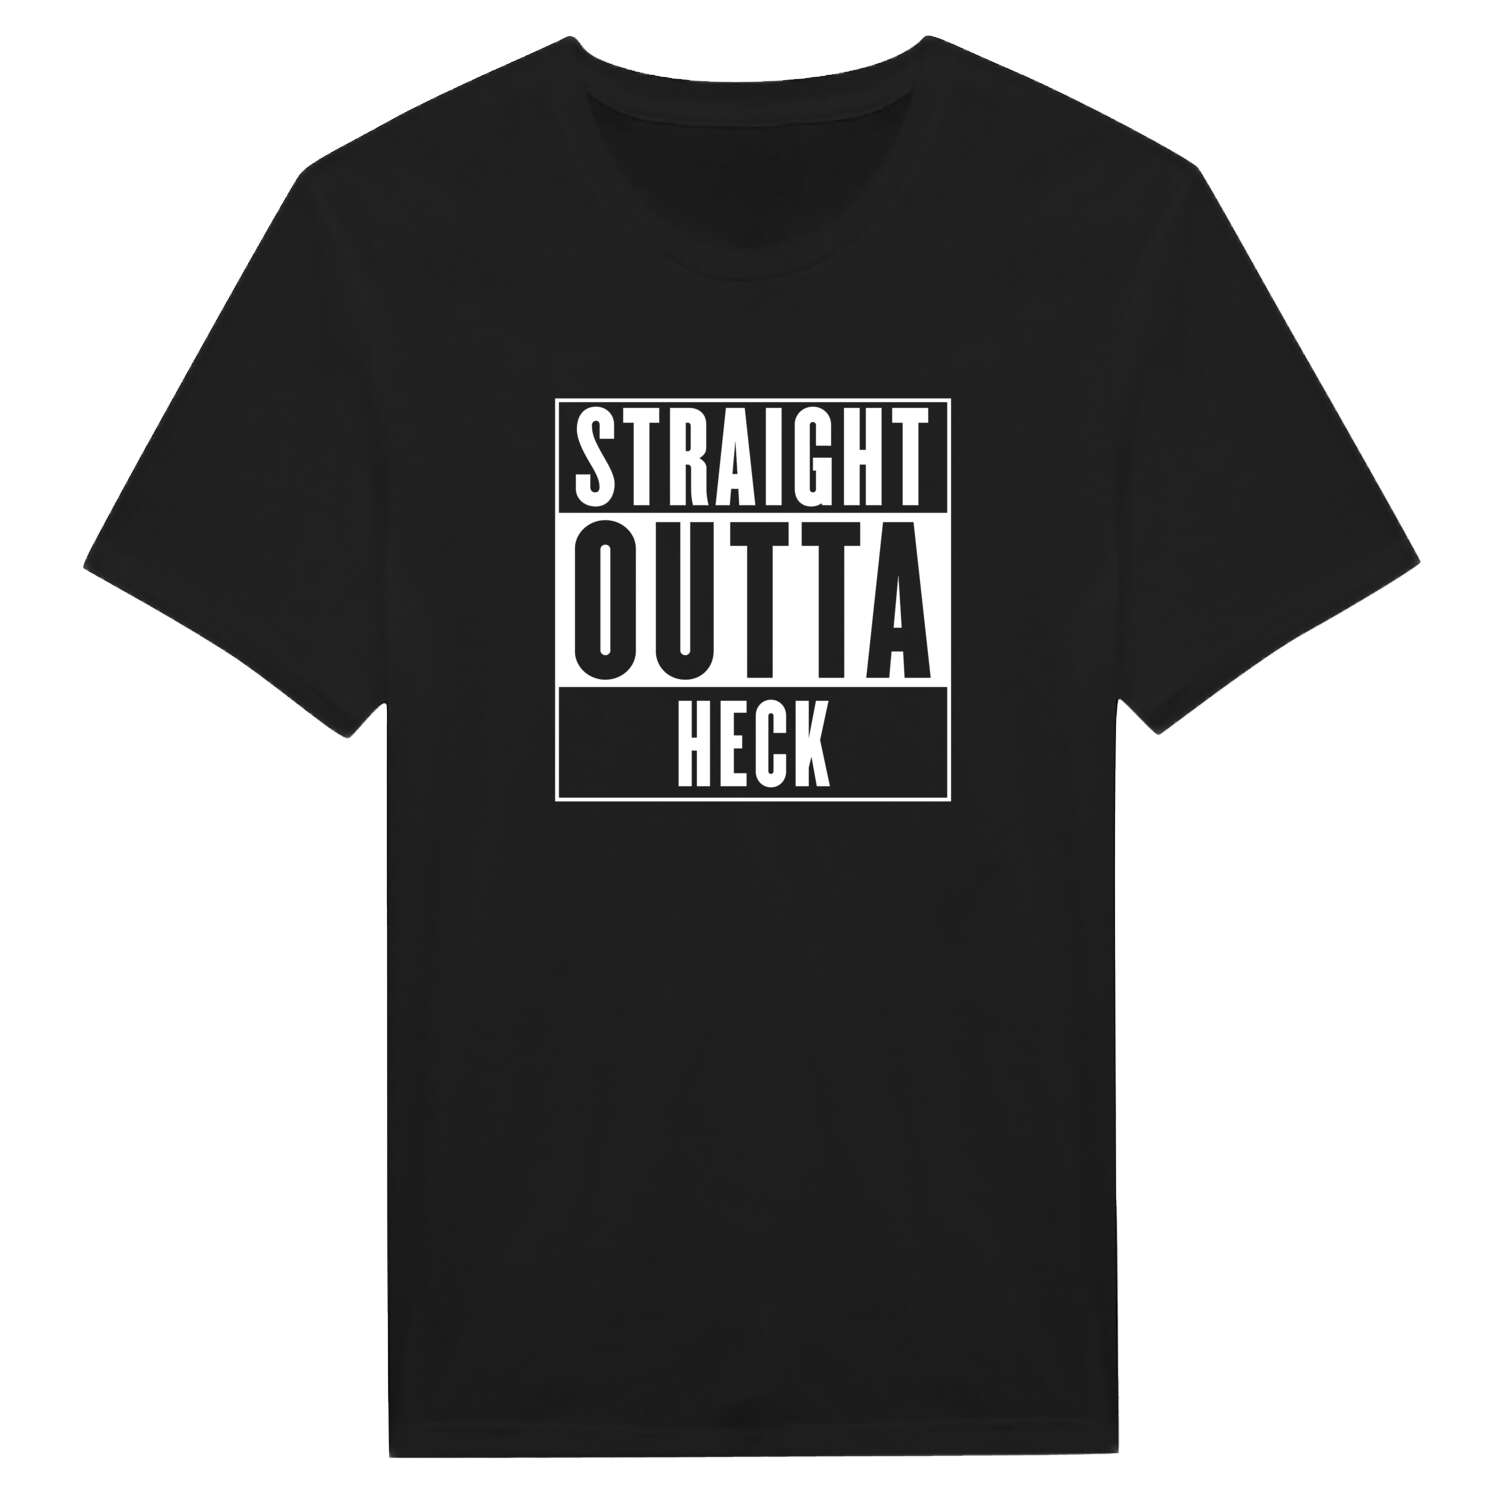 Heck T-Shirt »Straight Outta«